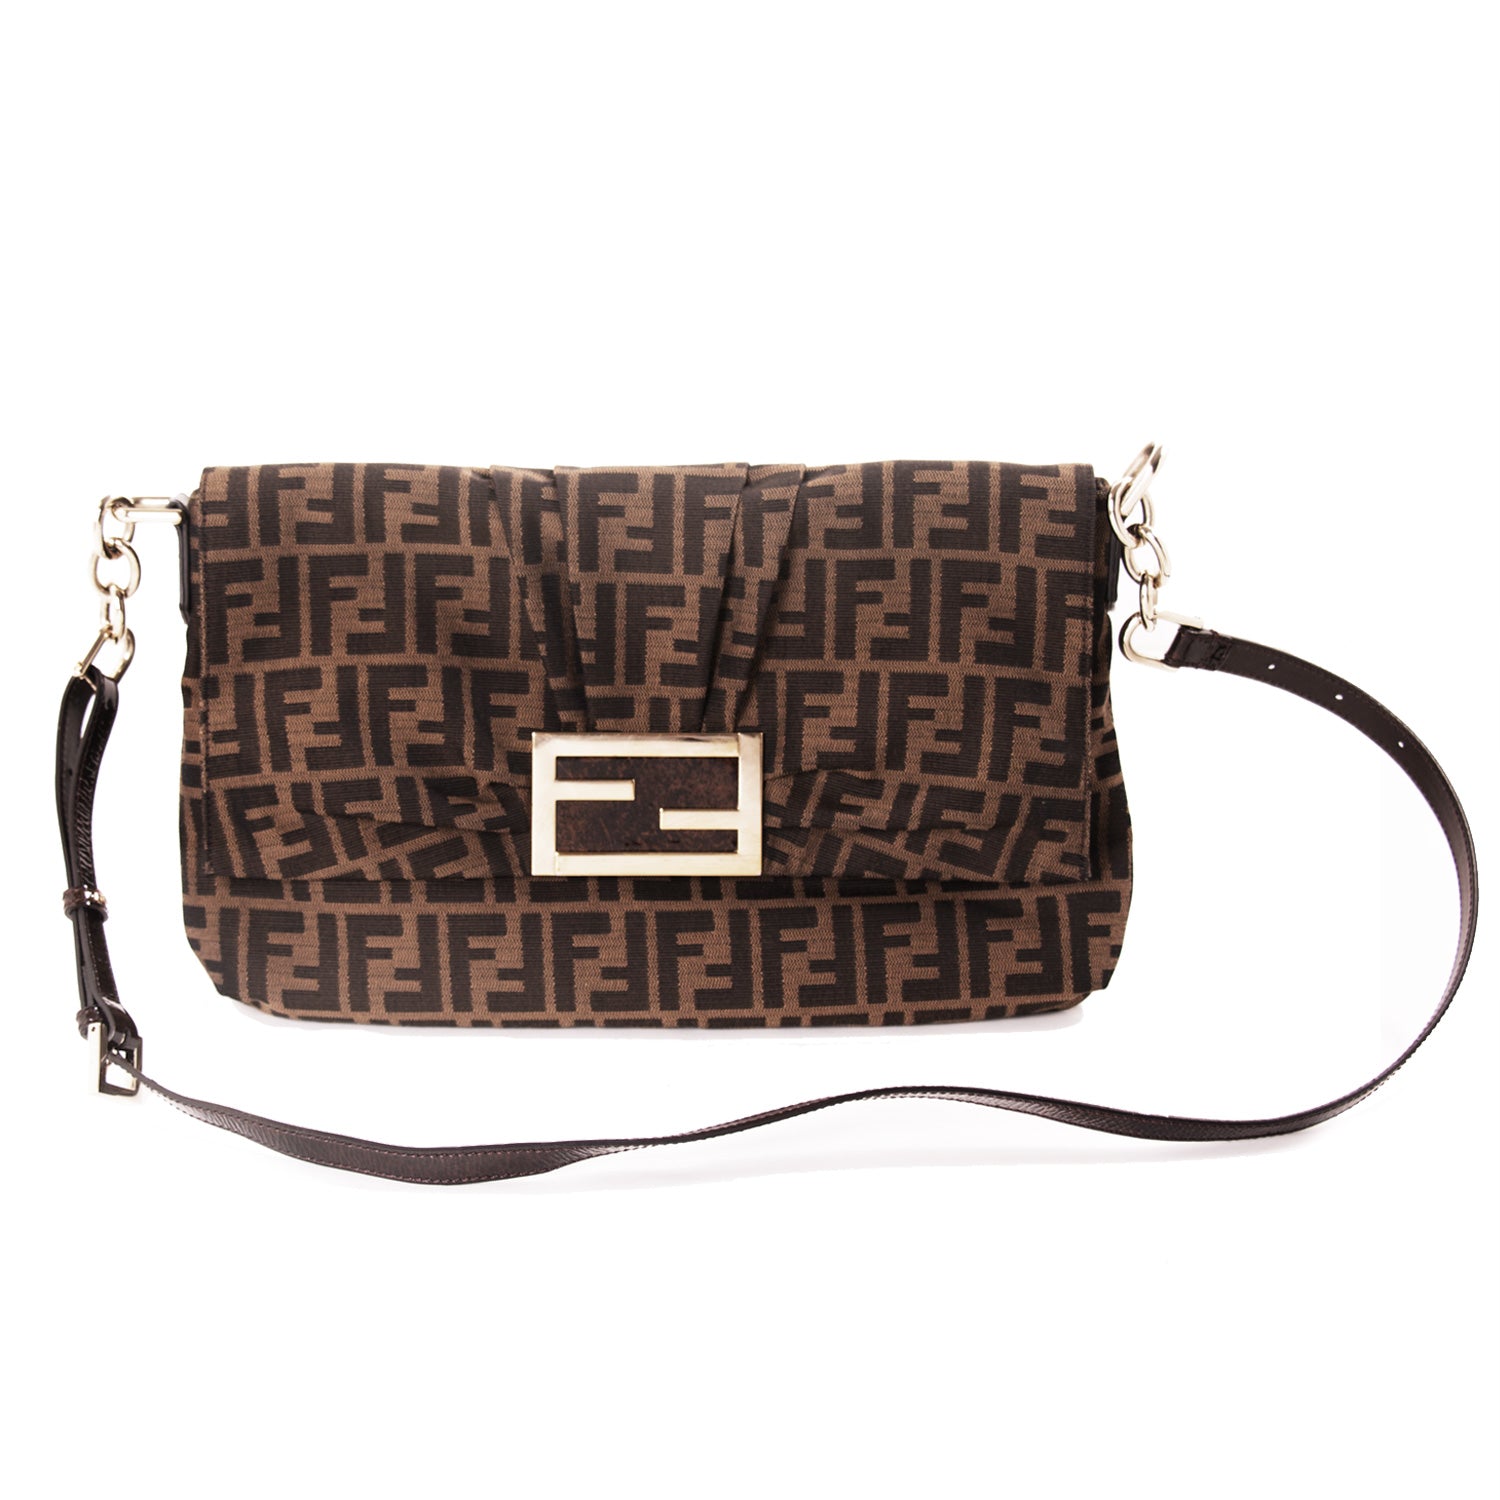 Shop authentic Fendi Zucca Canvas Cross Body Bag at revogue for just ...